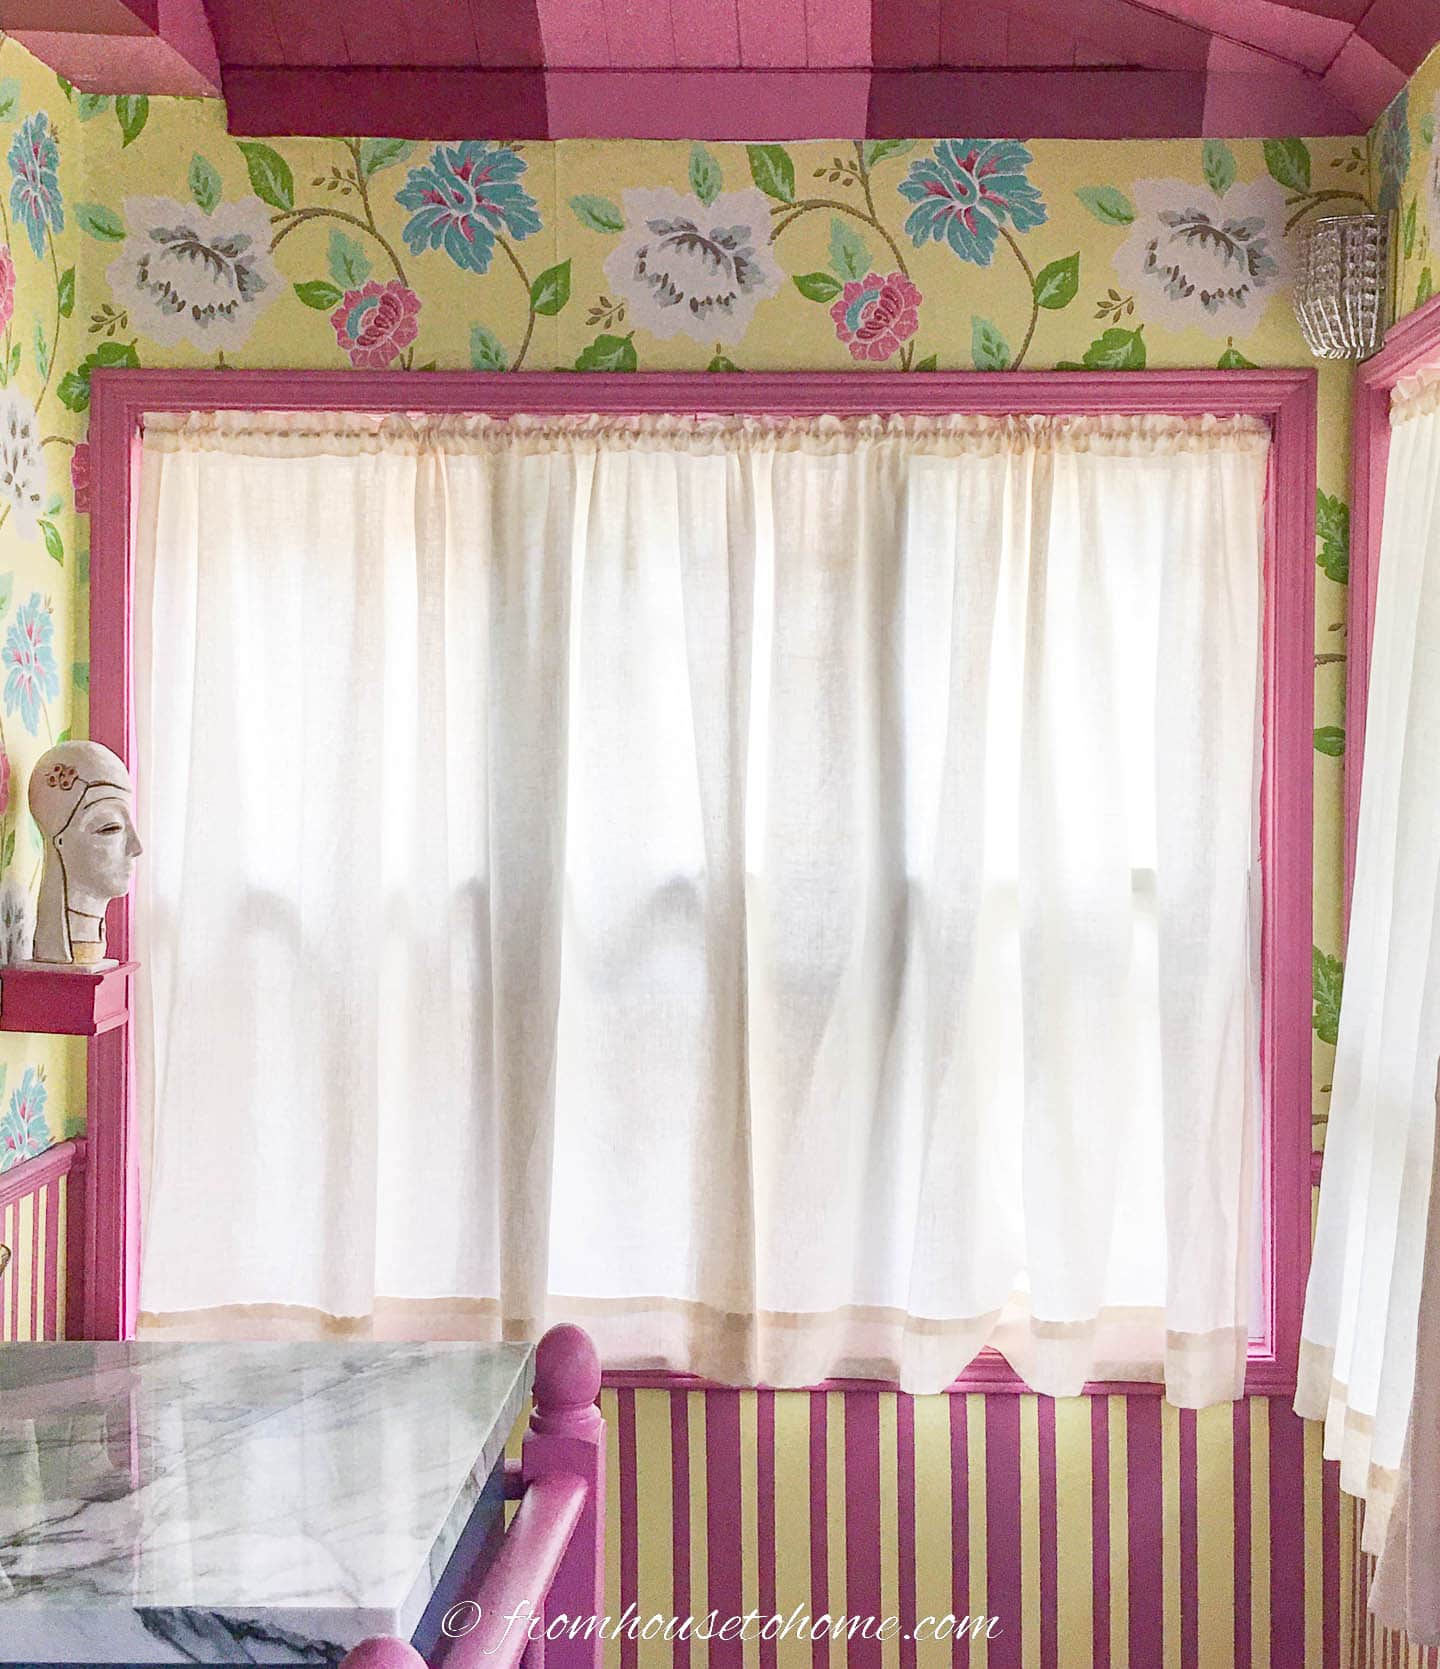 White curtains hung in a window surrounded by bright yellow, pink and blue wallpaper on the wall